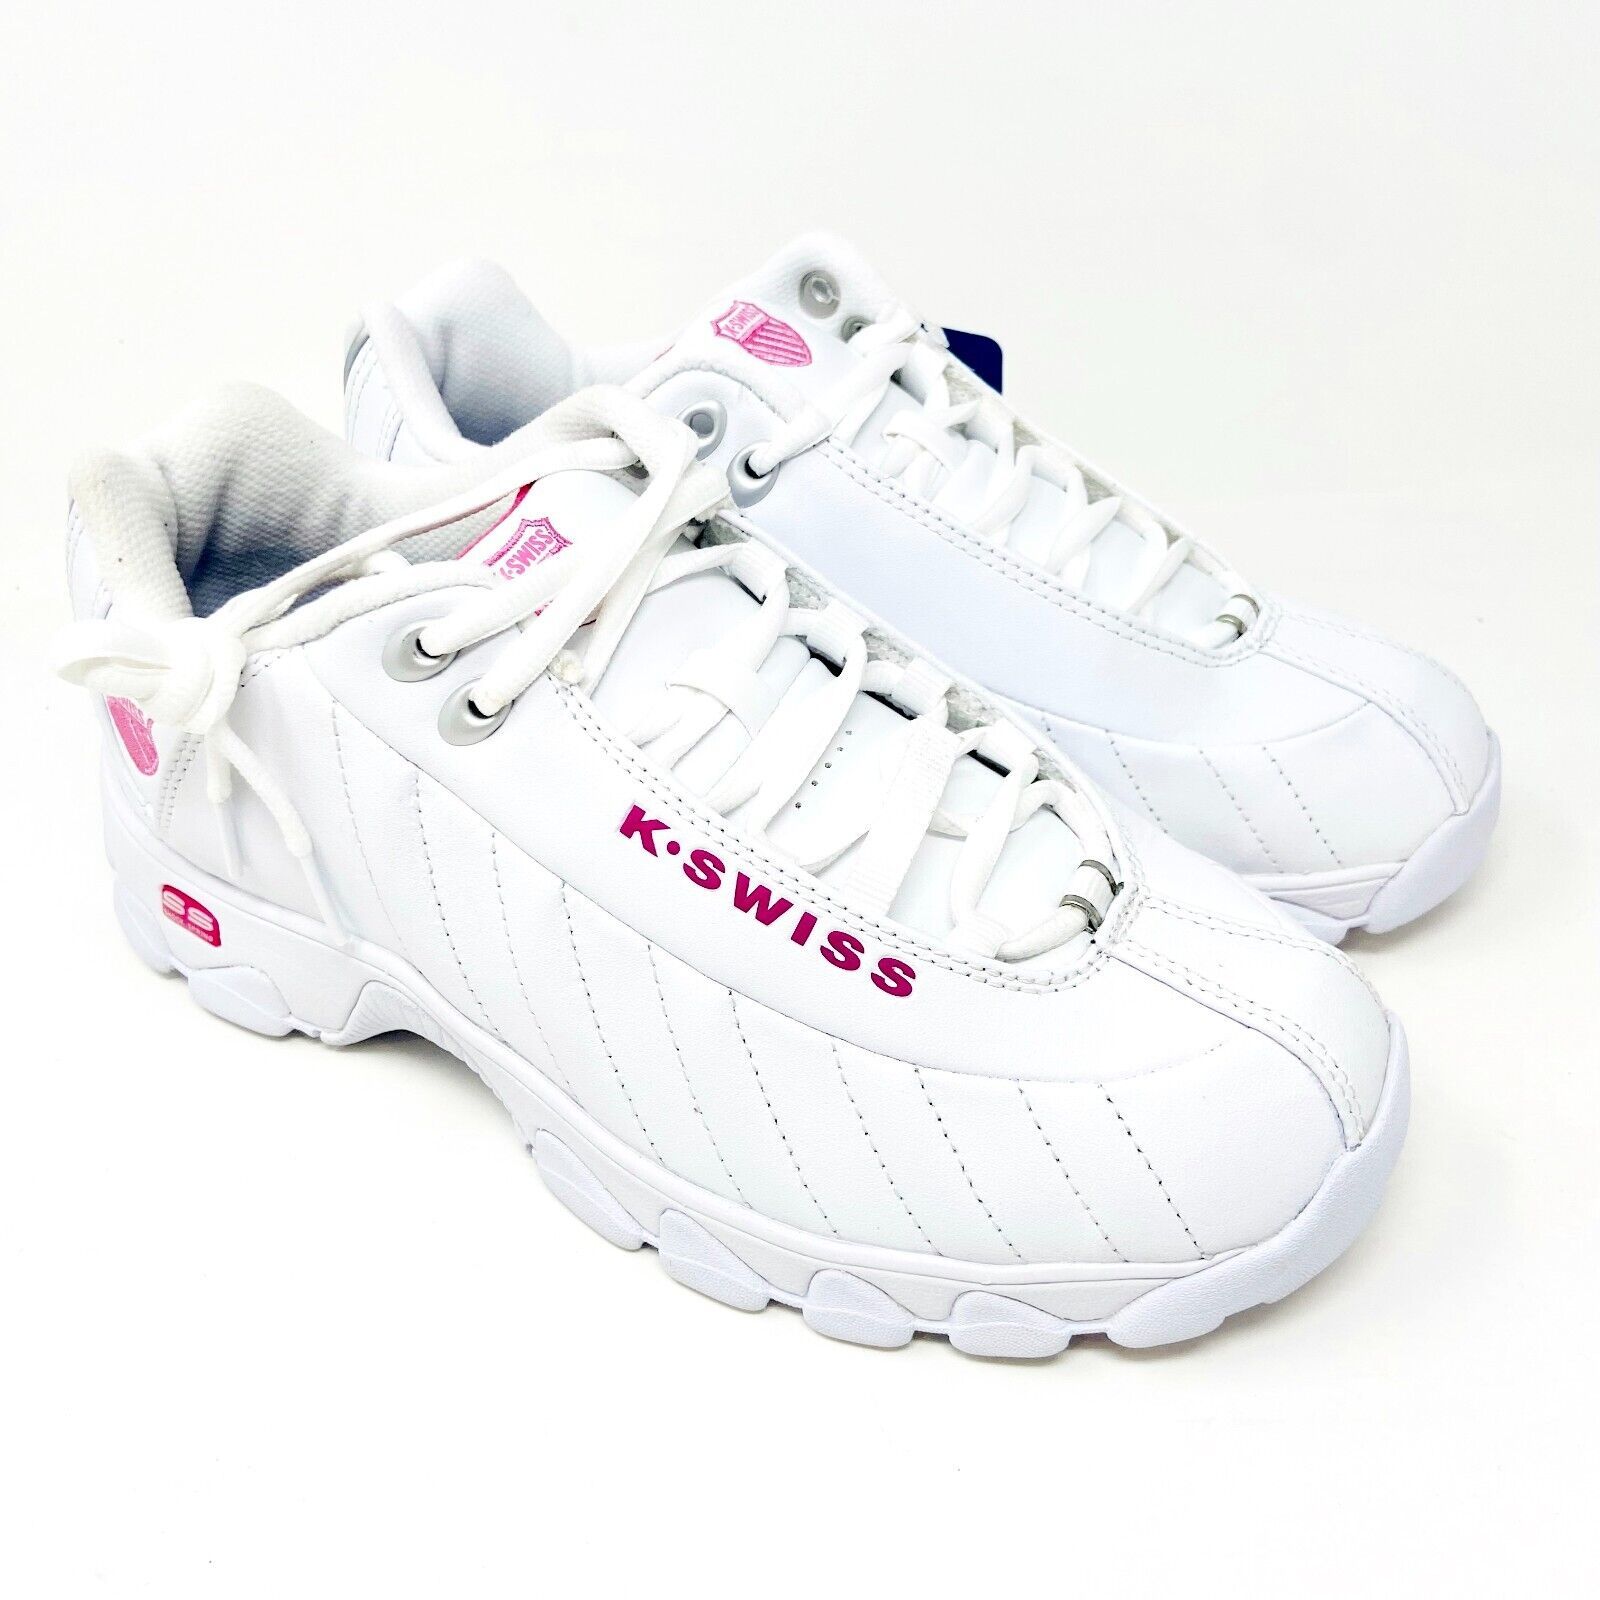 K-Swiss ST329 SMF White Shocking Pink Womens Size 9 Sneakers 93426 156